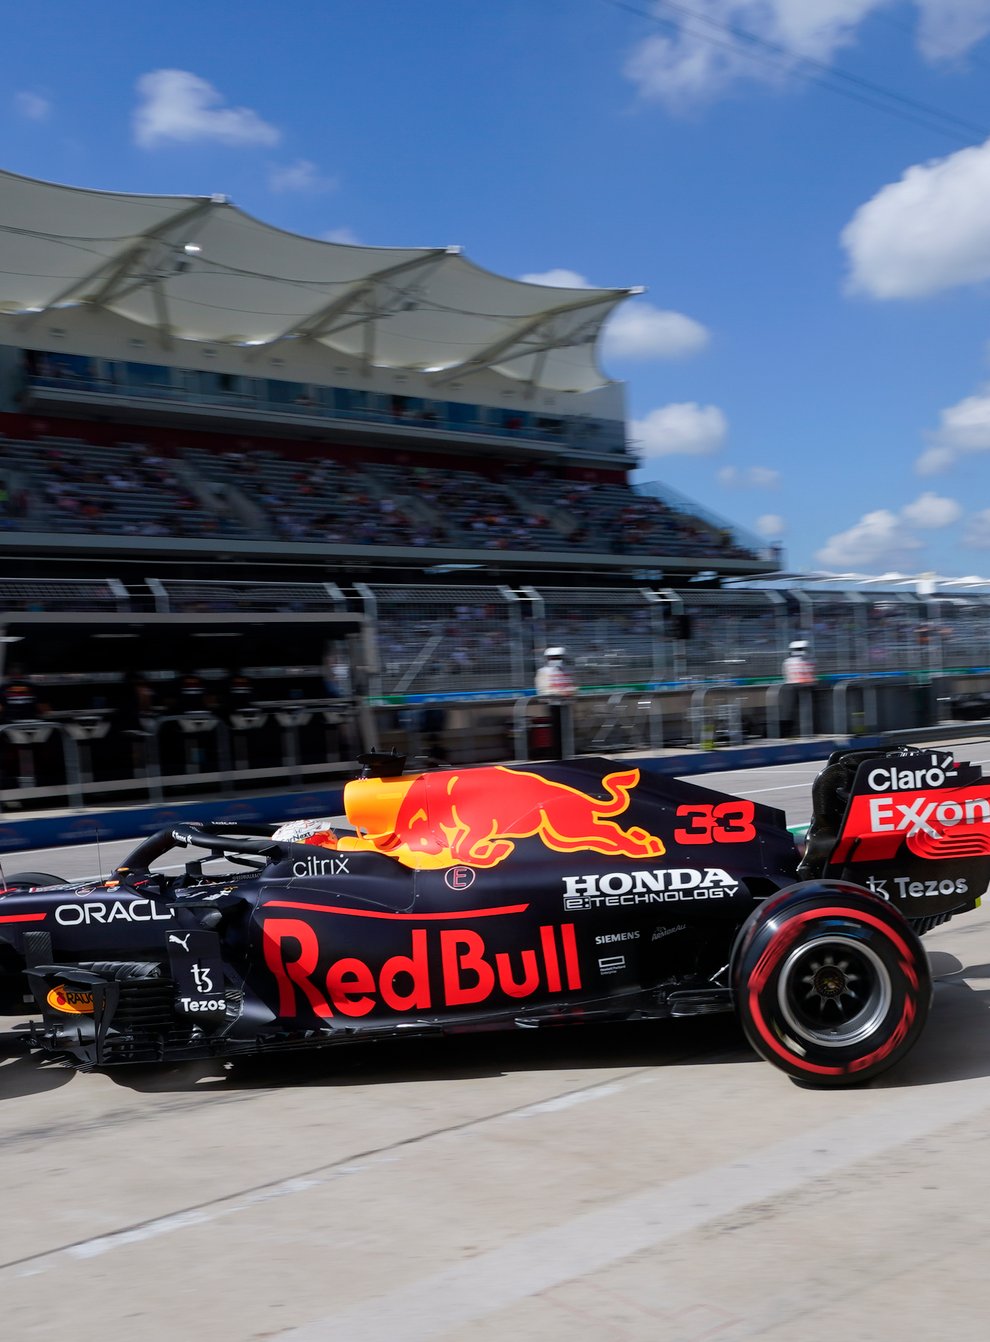 Max Verstappen, pictured, and Lewis Hamilton clashed in practice (Darron Cummings/AP)